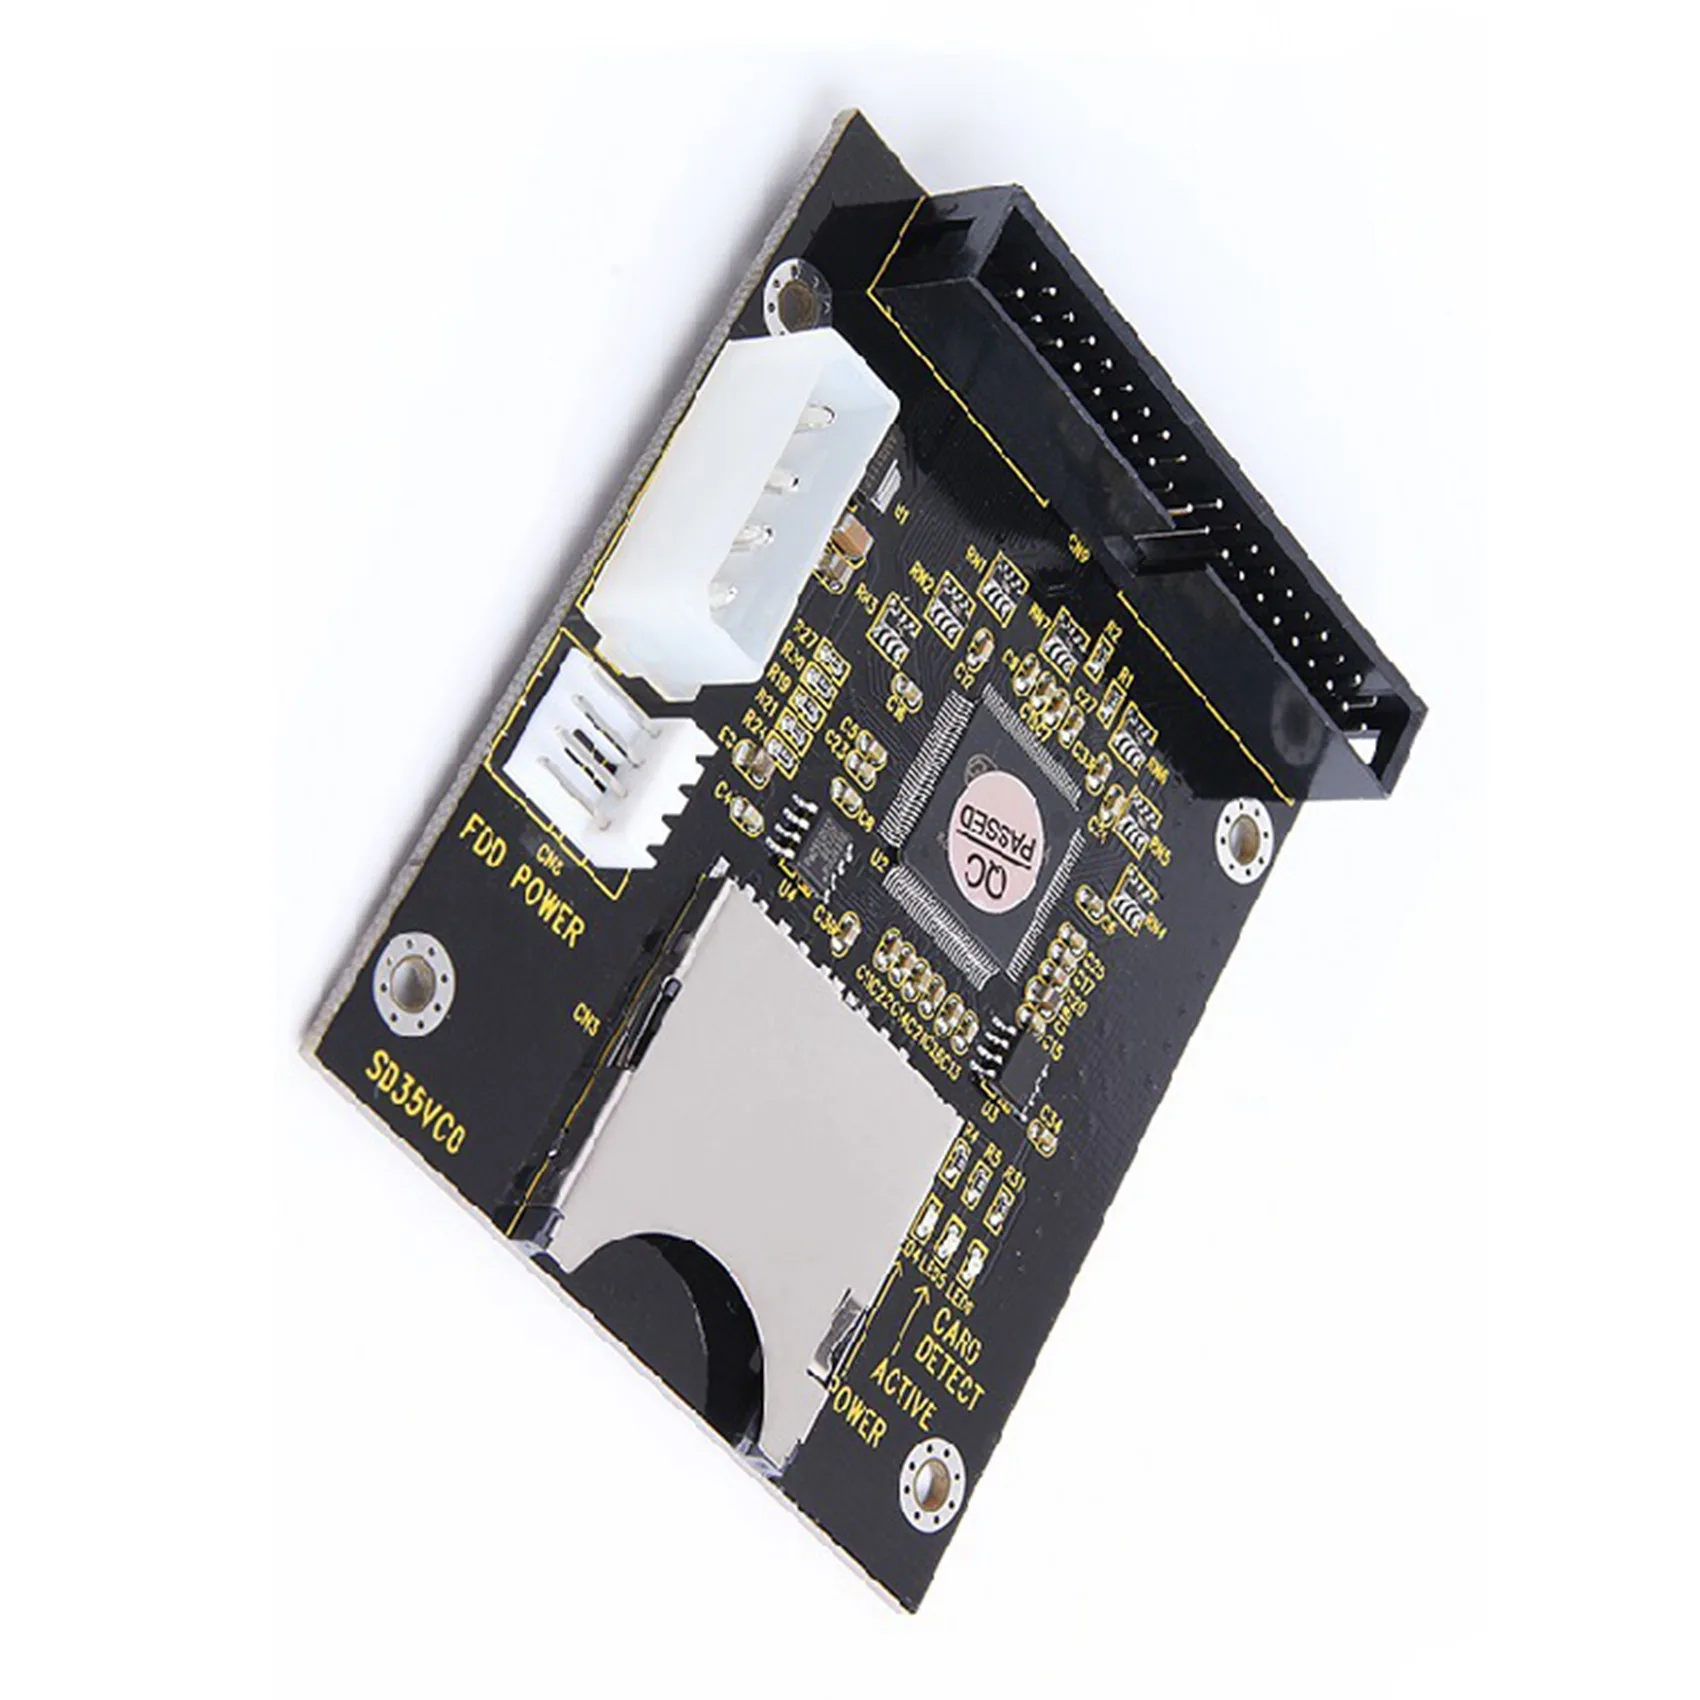 Карта конвертера SD на 3,5 дюйма IDE 40 Pin IDE SD Card Adapter SSD Embedded Storage Adapter Card IDE Expansion Card 4